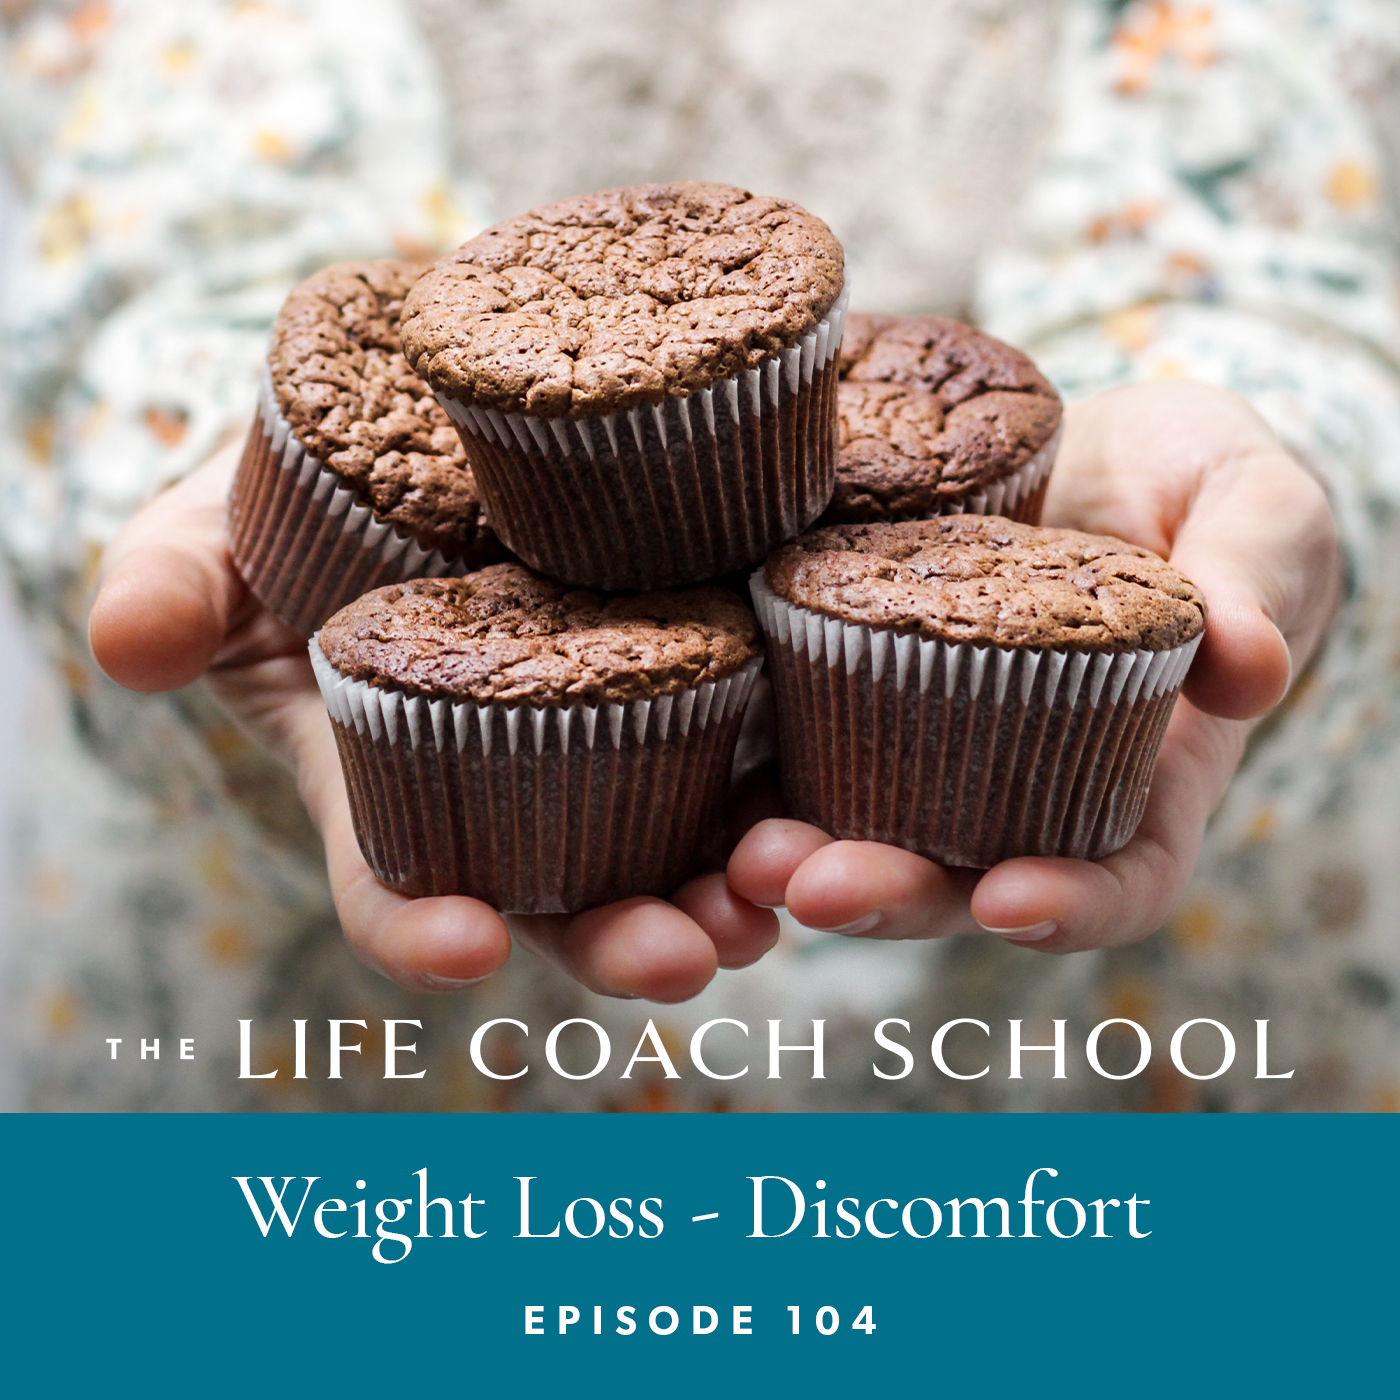 The Life Coach School Podcast with Brooke Castillo | Episode 104 | Weight Loss – Discomfort